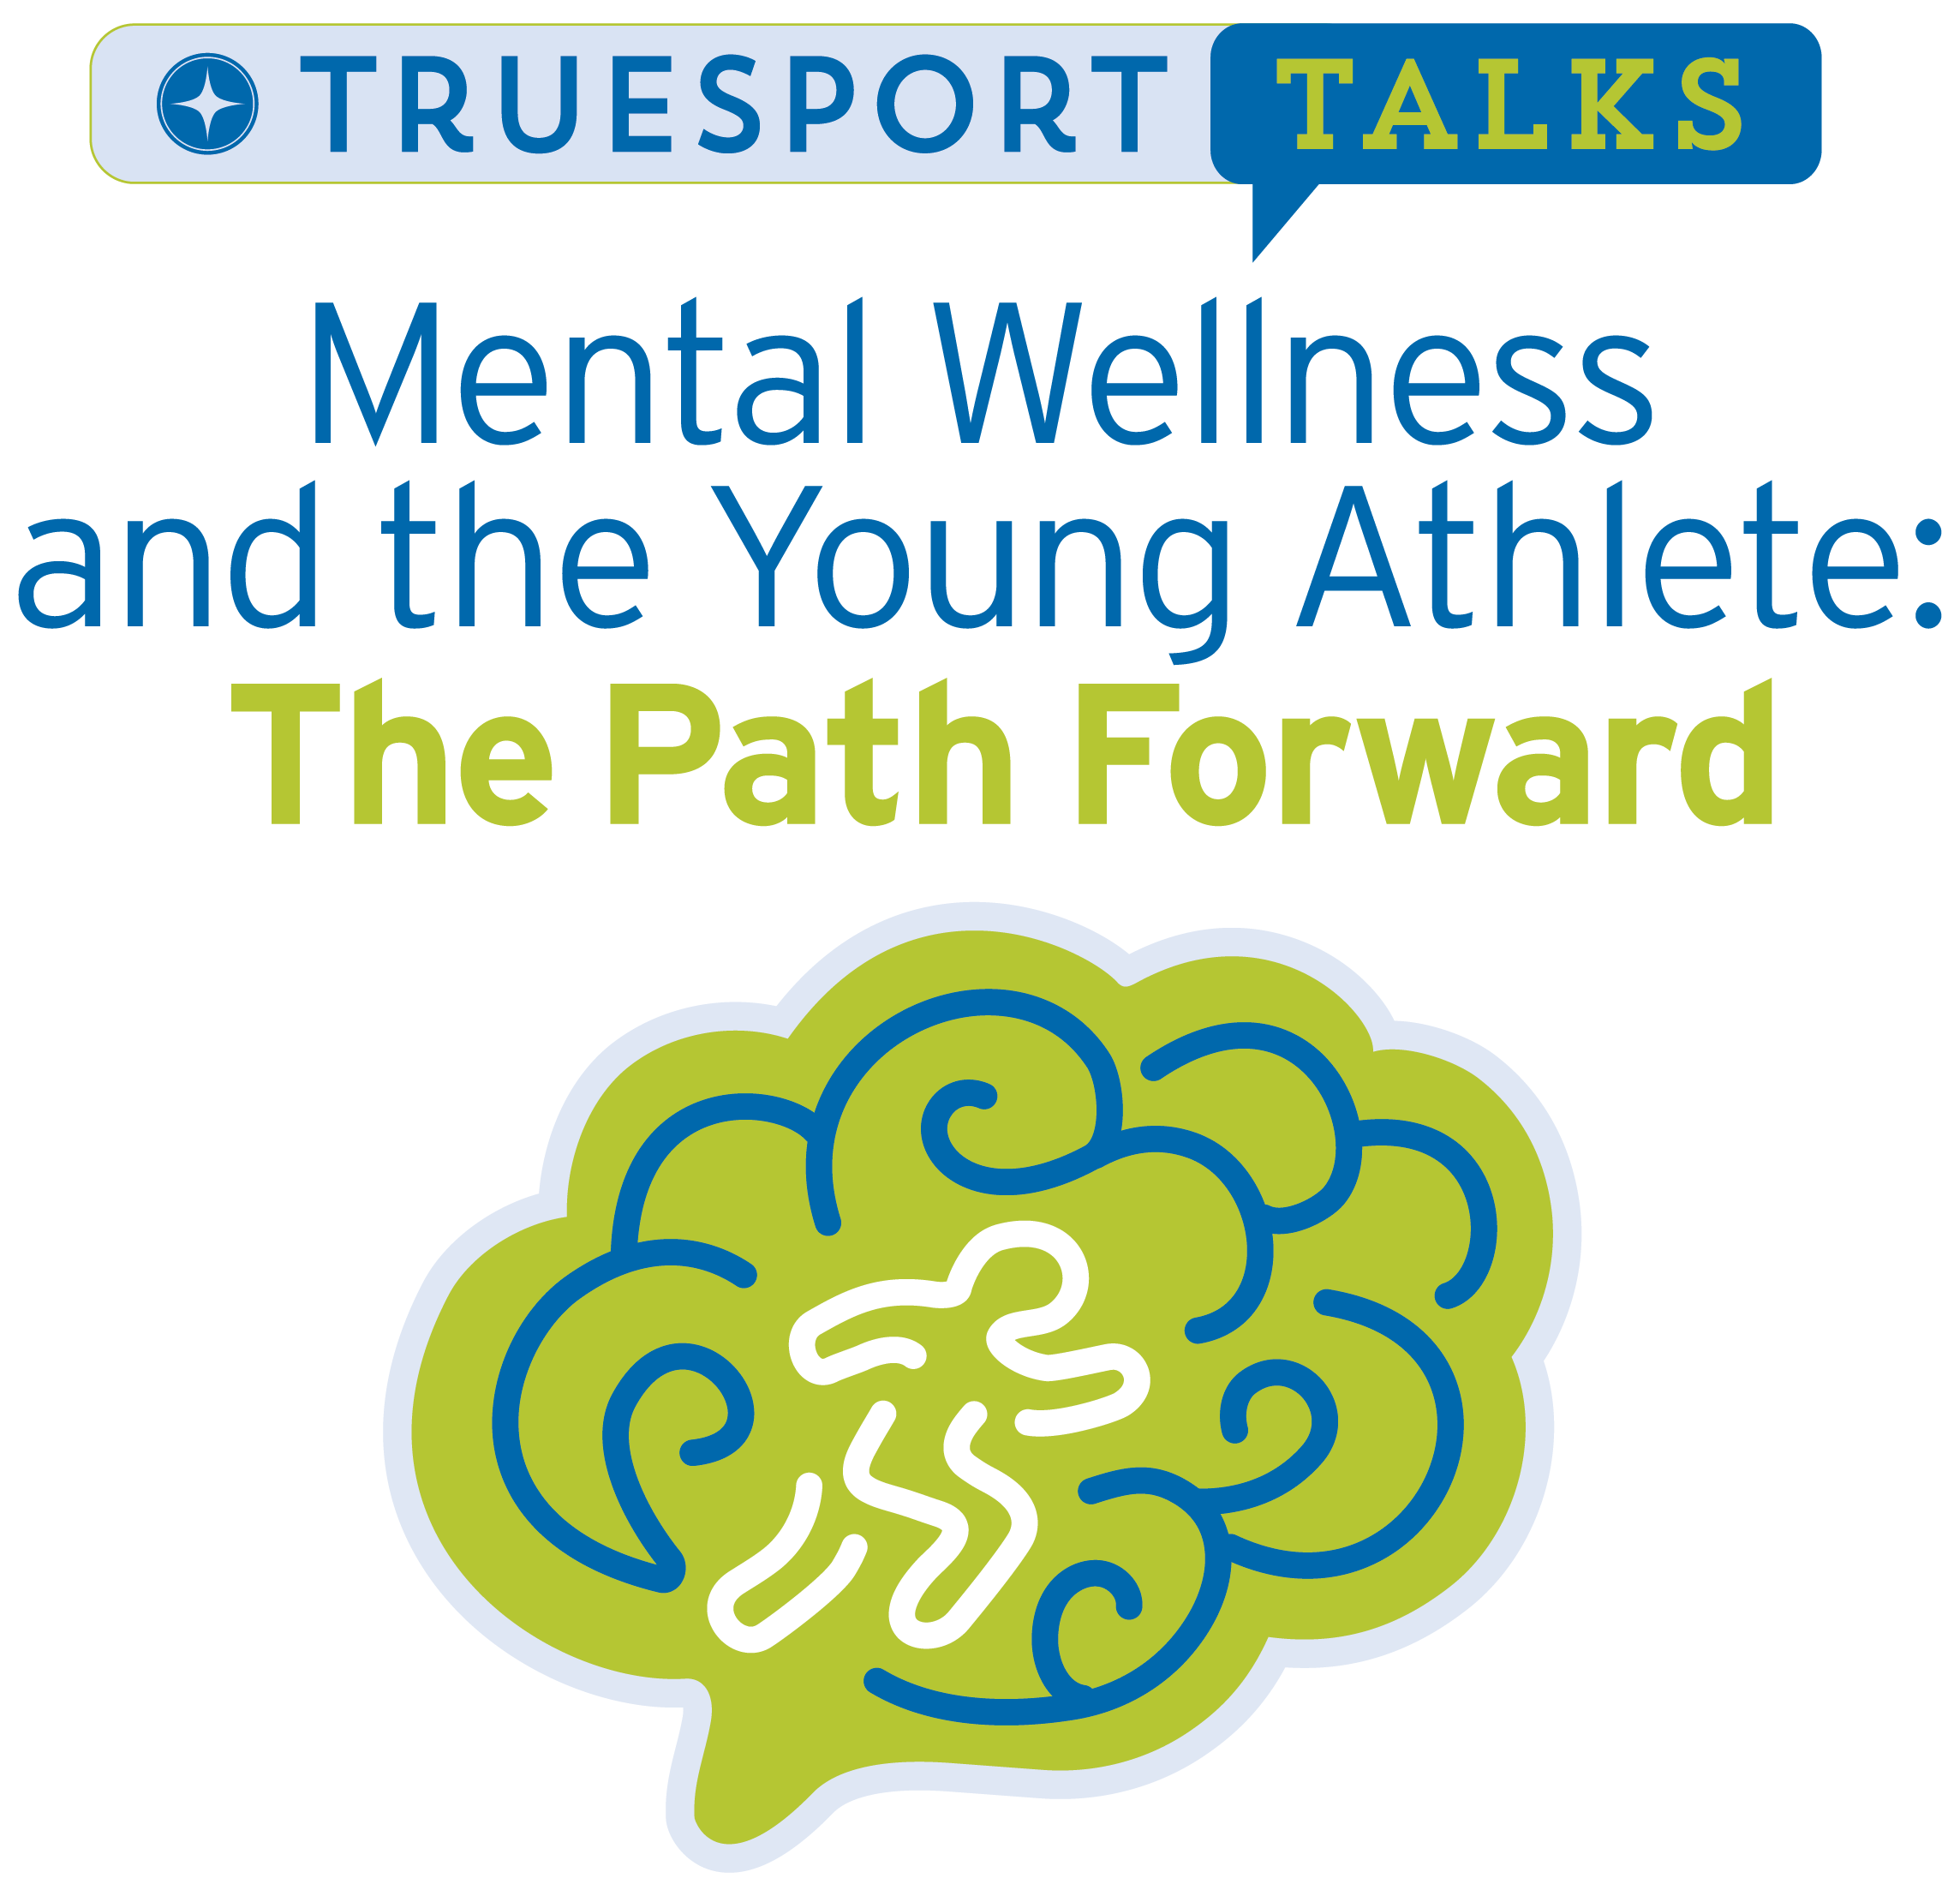 TrueSport Talks - Mental Wellness and the Yount Athlete: The Path Forward